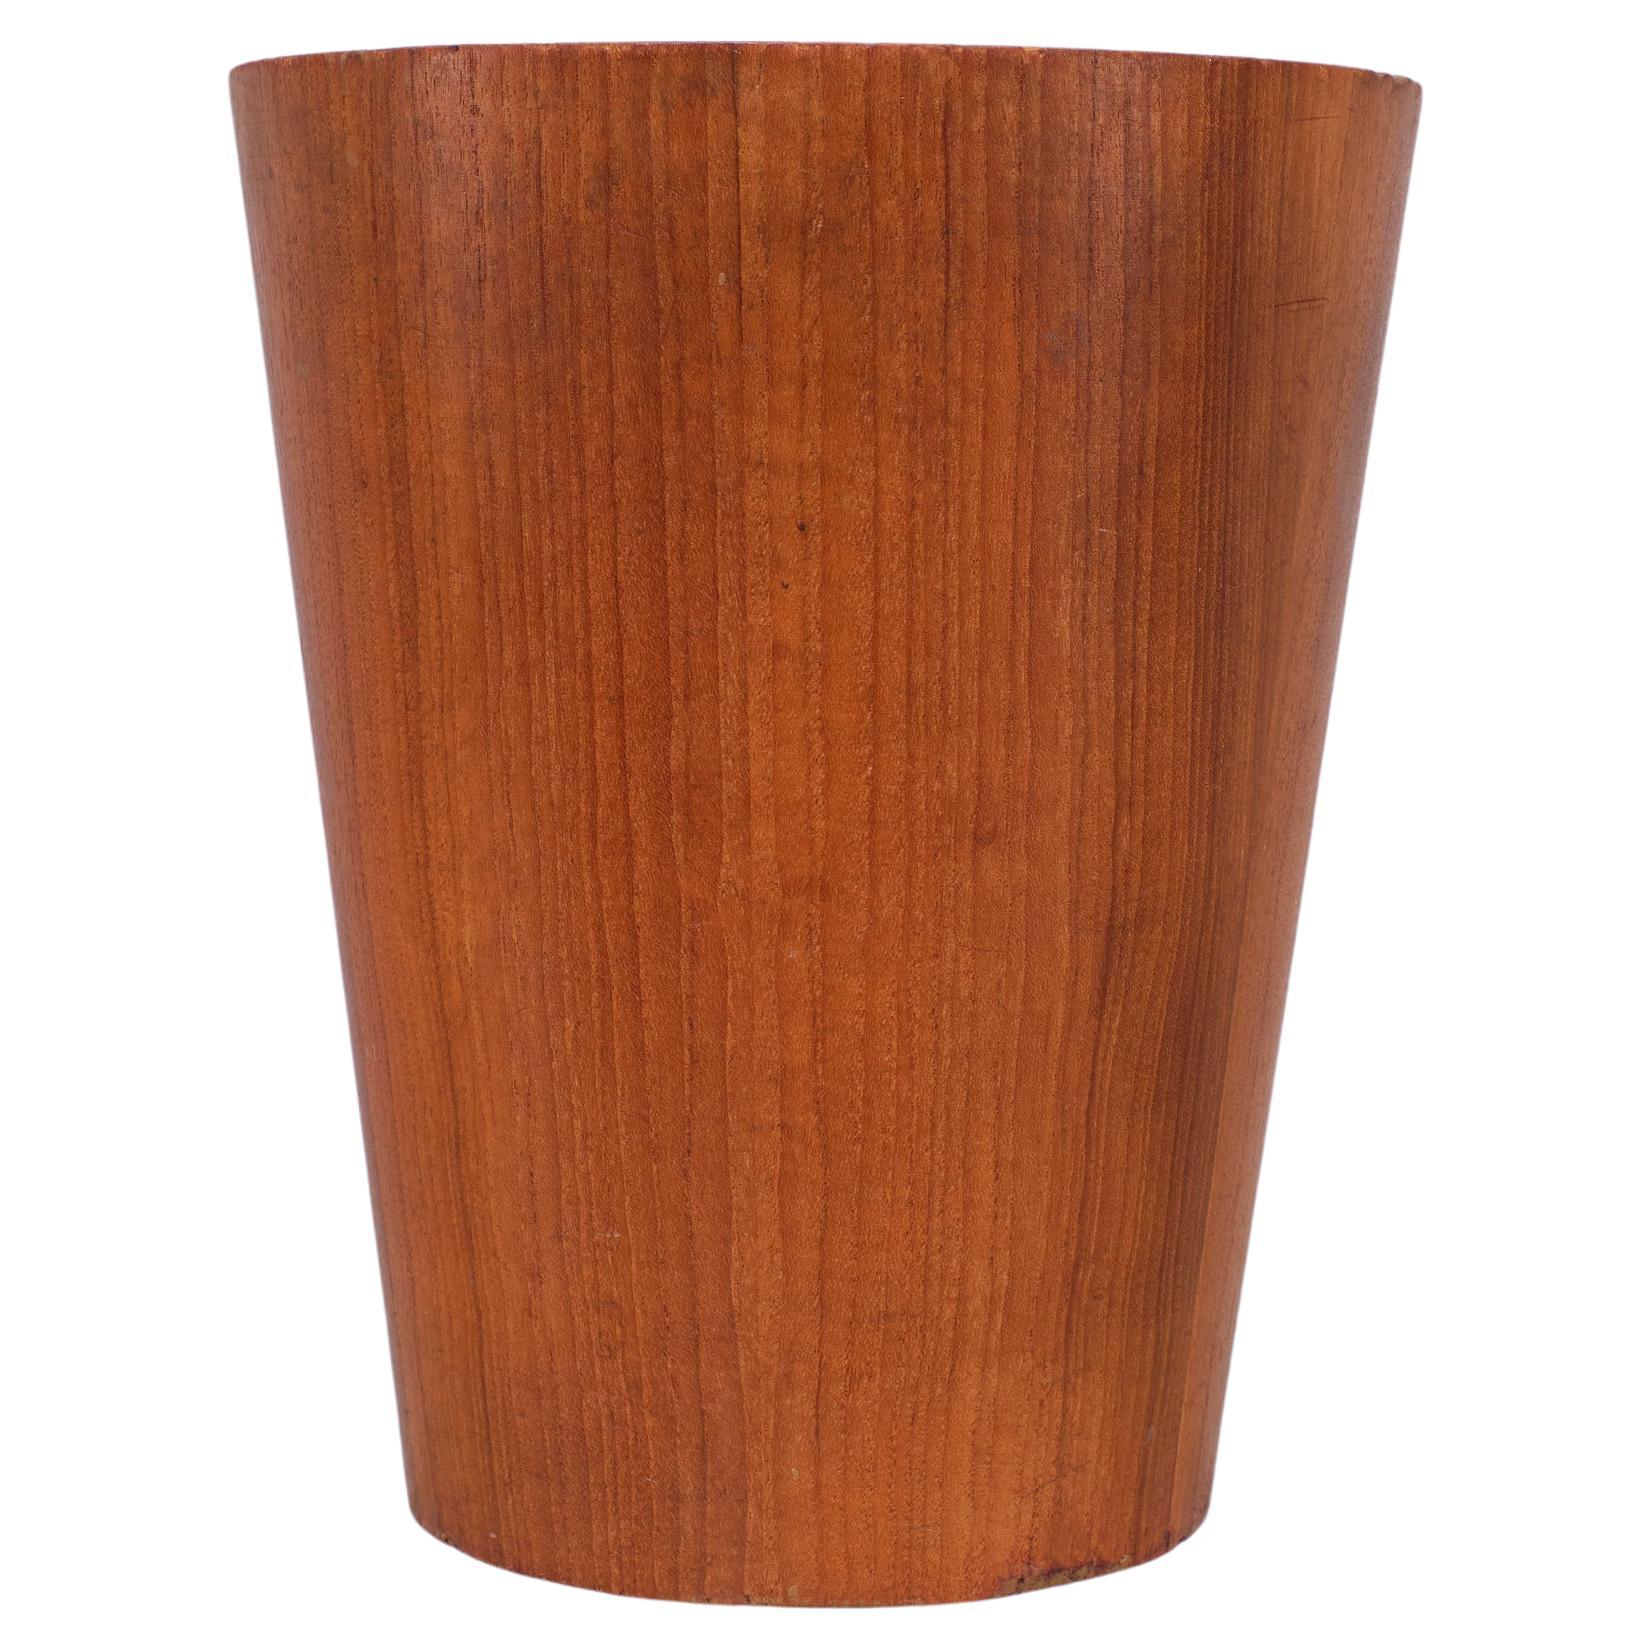 Very nice Teak paper basket . Round shape . Normal Used condition . 